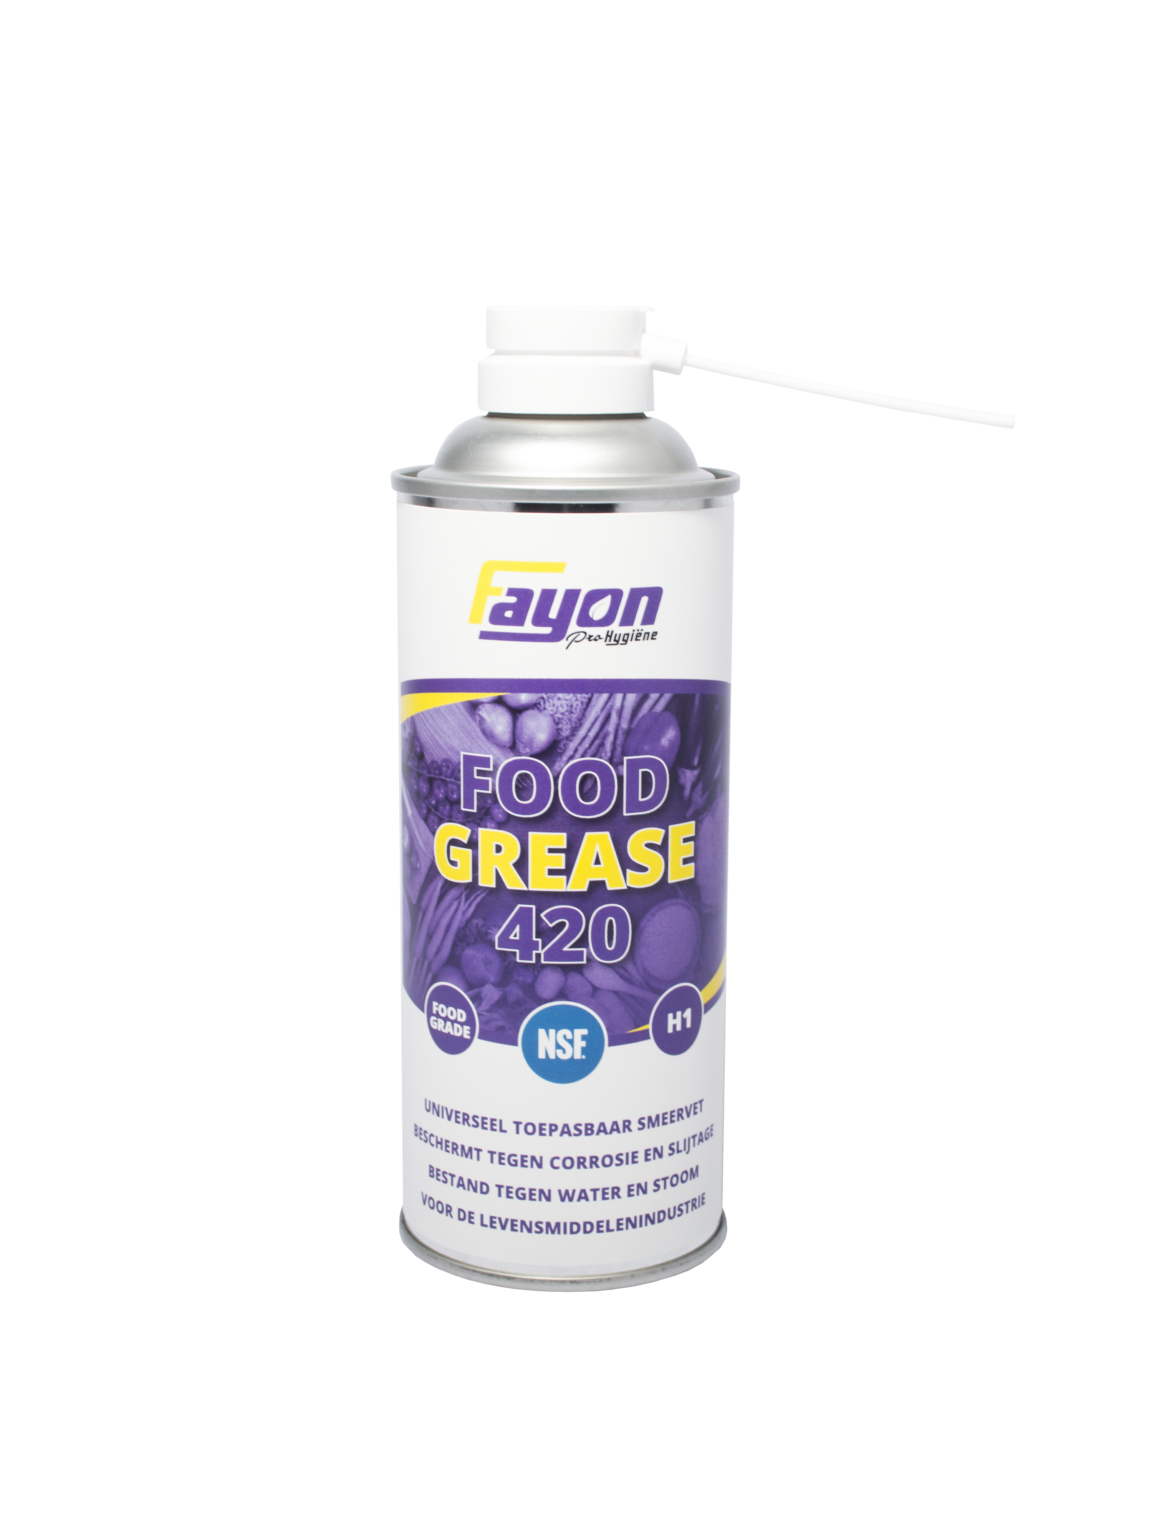 Food Grease Concentrate - 420 NSF H1 – Fayon